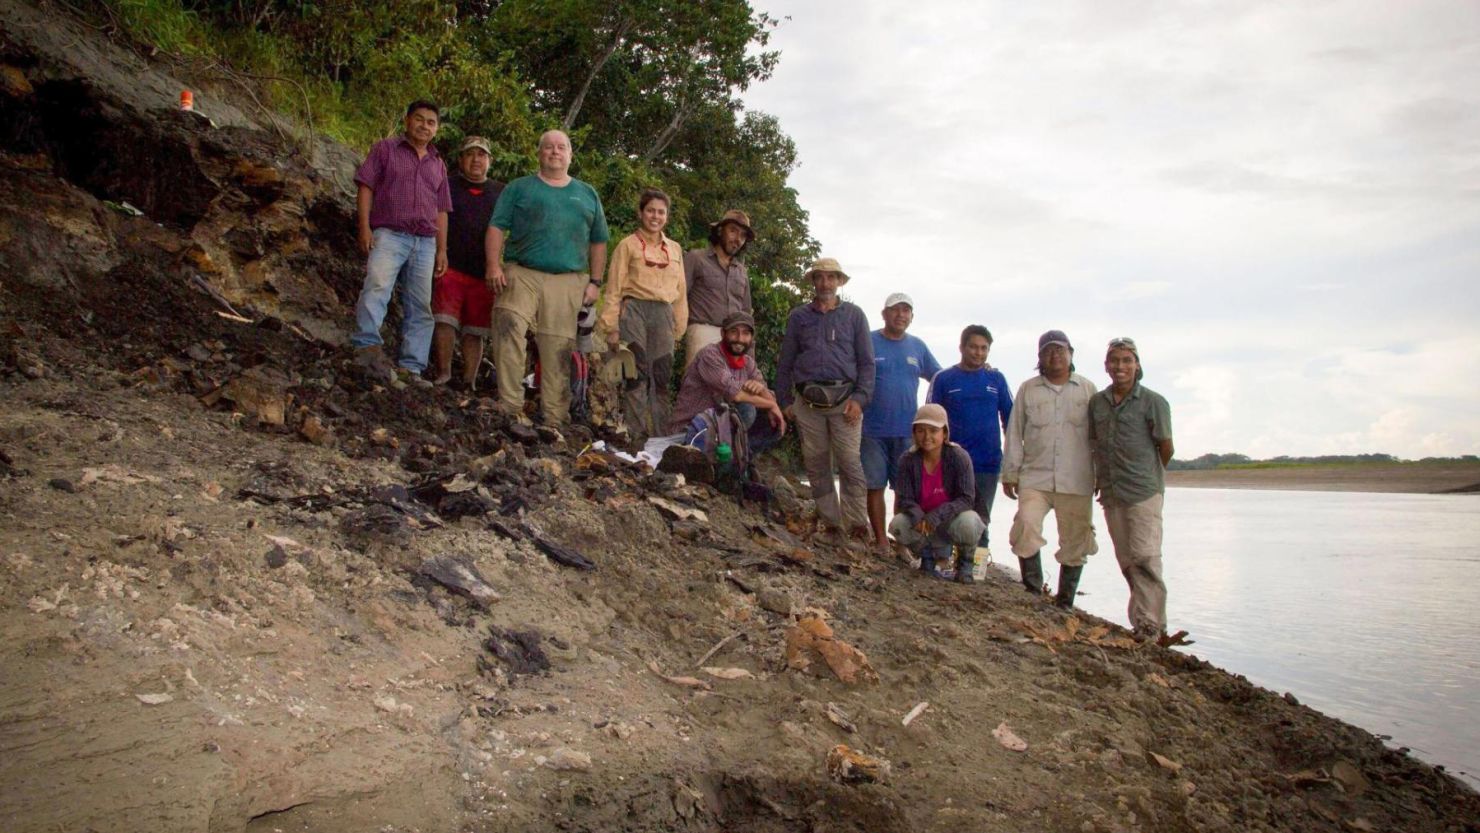 An international team of researchers discovered an ancient dolphin fossil during a 2018 expedition to the Napo River in Peru.